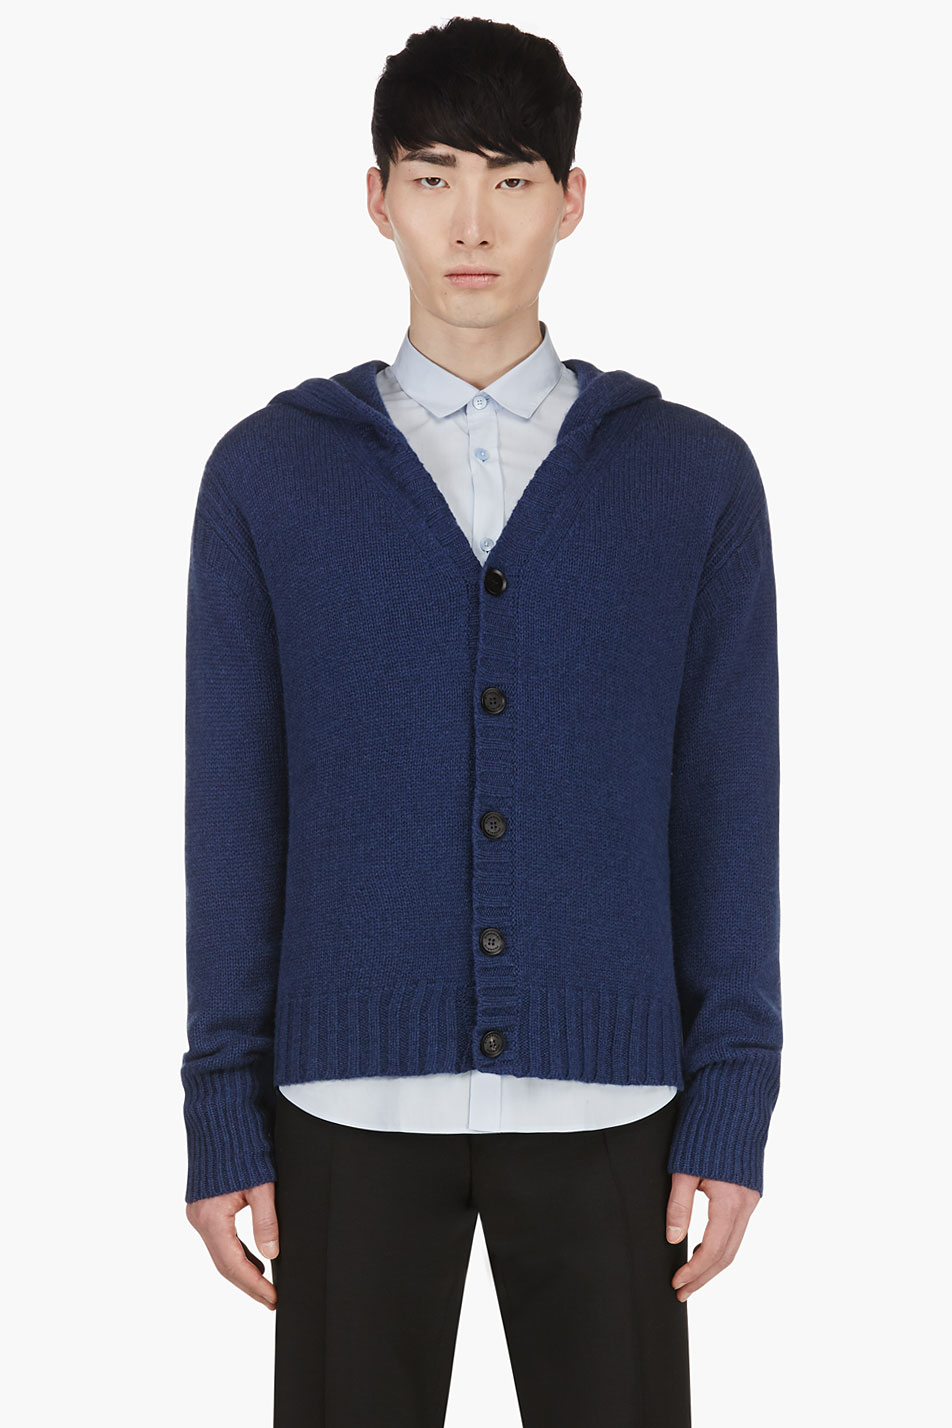 Lyst - Burberry Prorsum Blue Cashmere Y_front Hooded Sweater in Blue ...